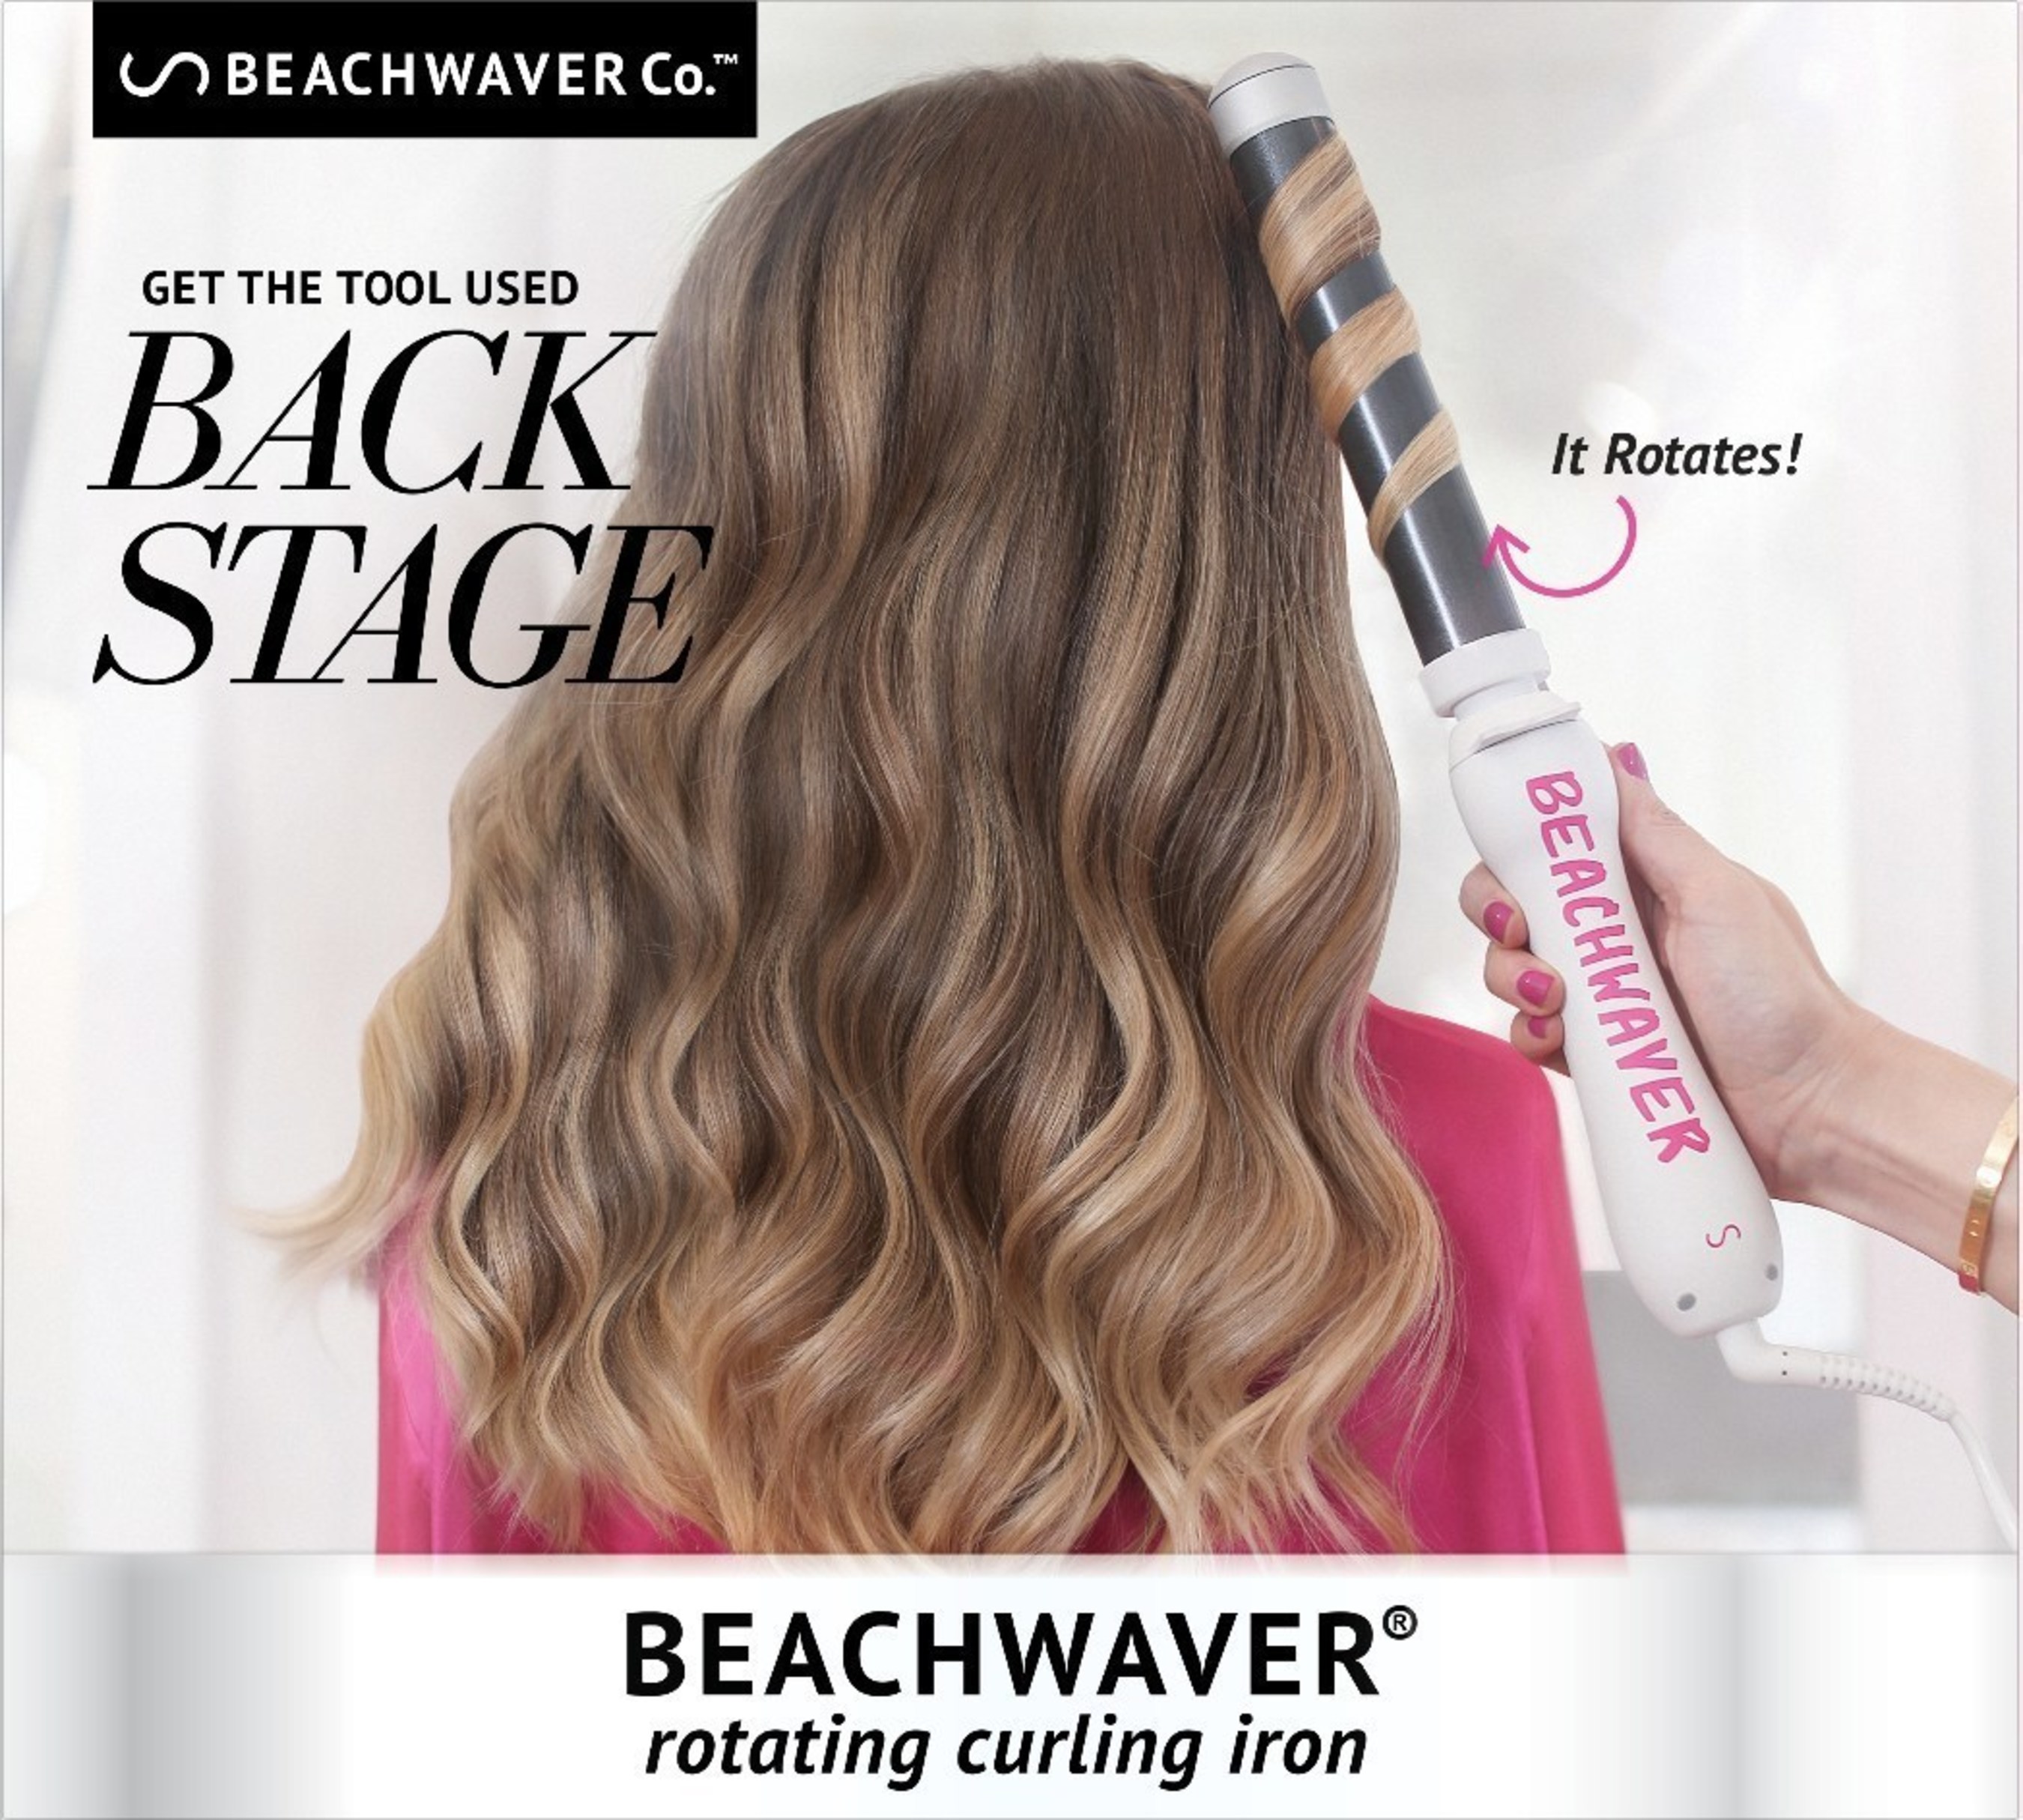 The Beachwaver And Founder, Sarah Potempa, Are Officially Making Waves  Again At The 2016 Victoria's Secret Fashion Show